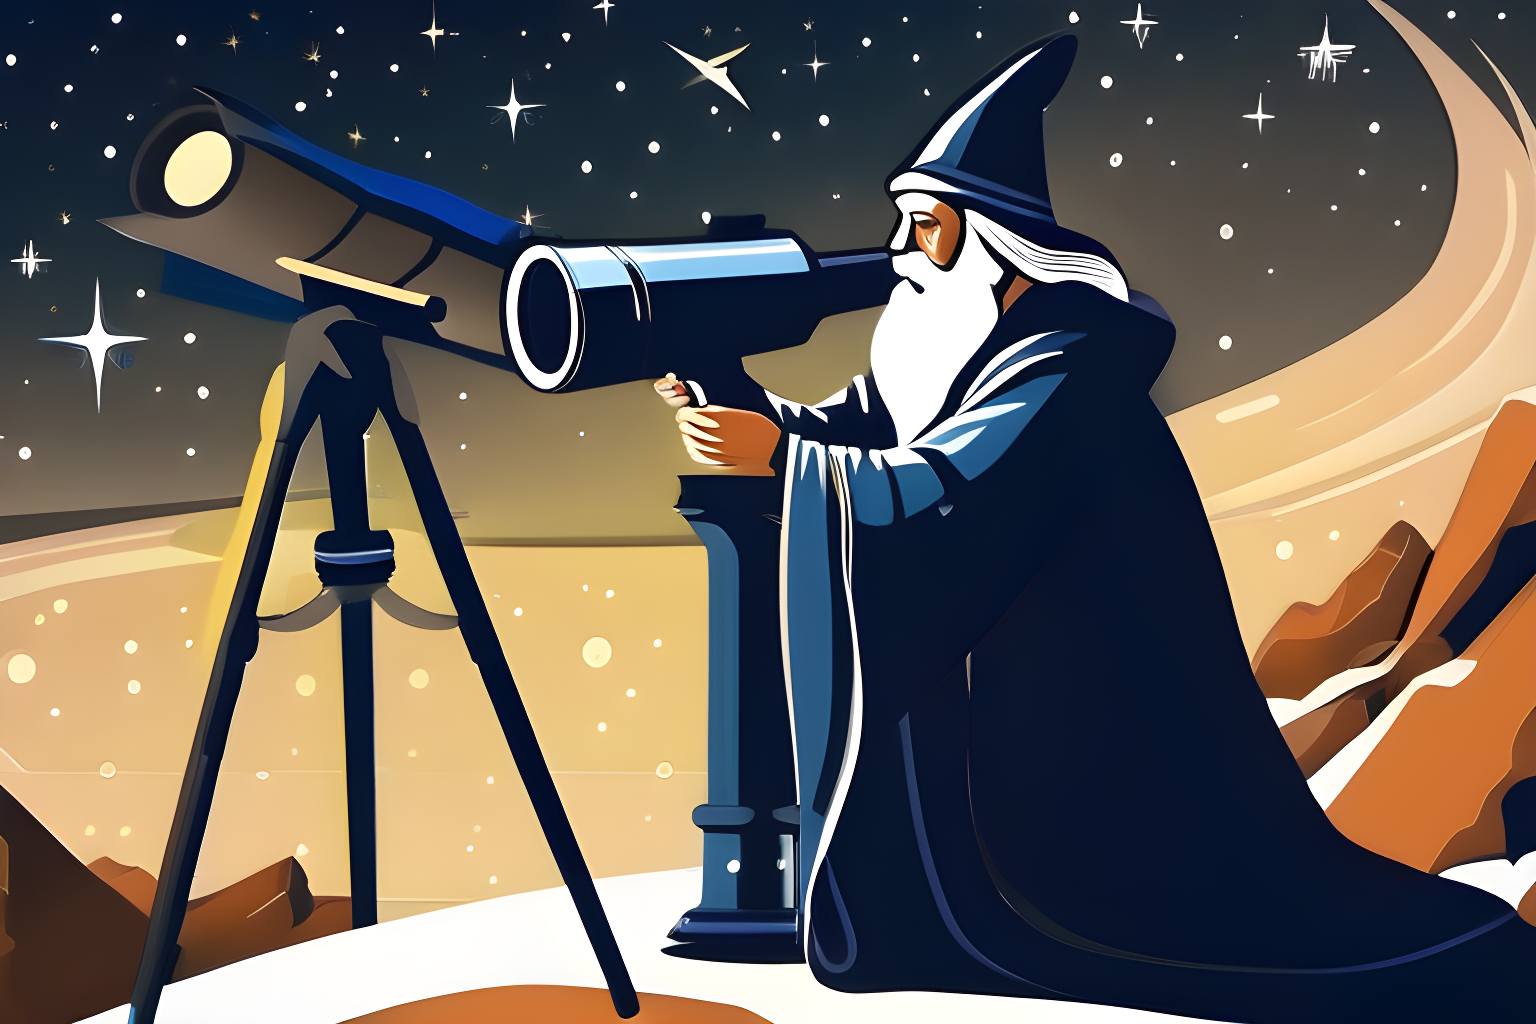 An old wizard looking into a telescope towards the stars